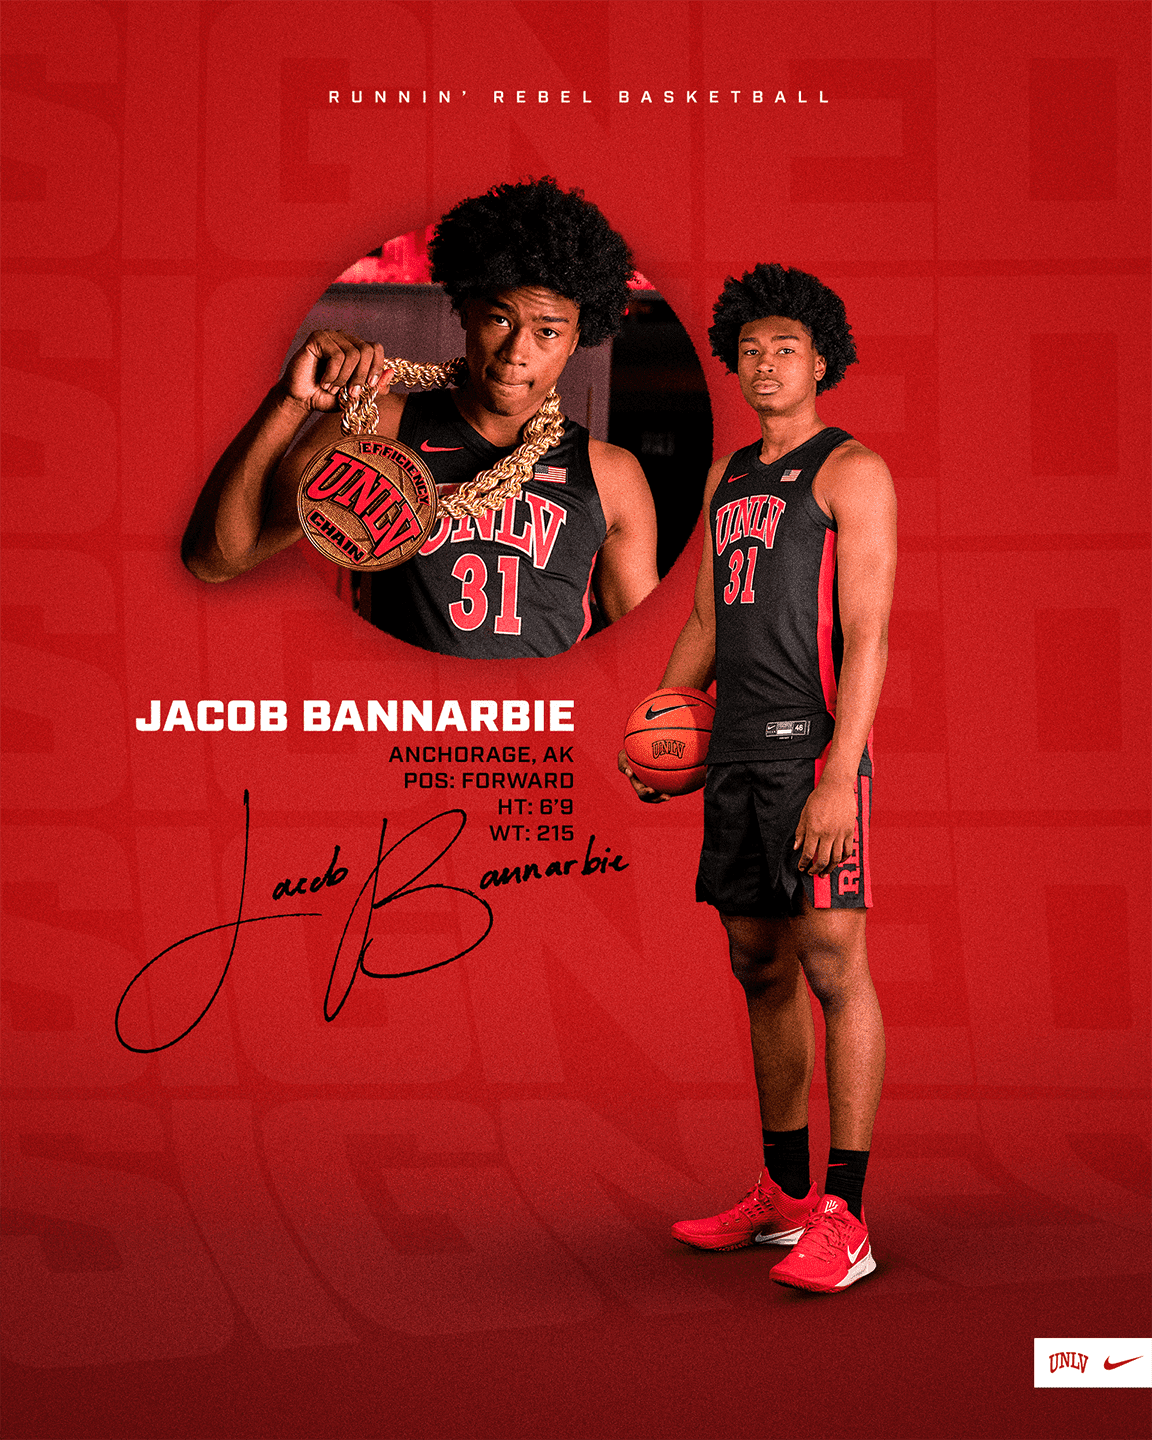 6-9 forward Bannarbie signs with UNLV